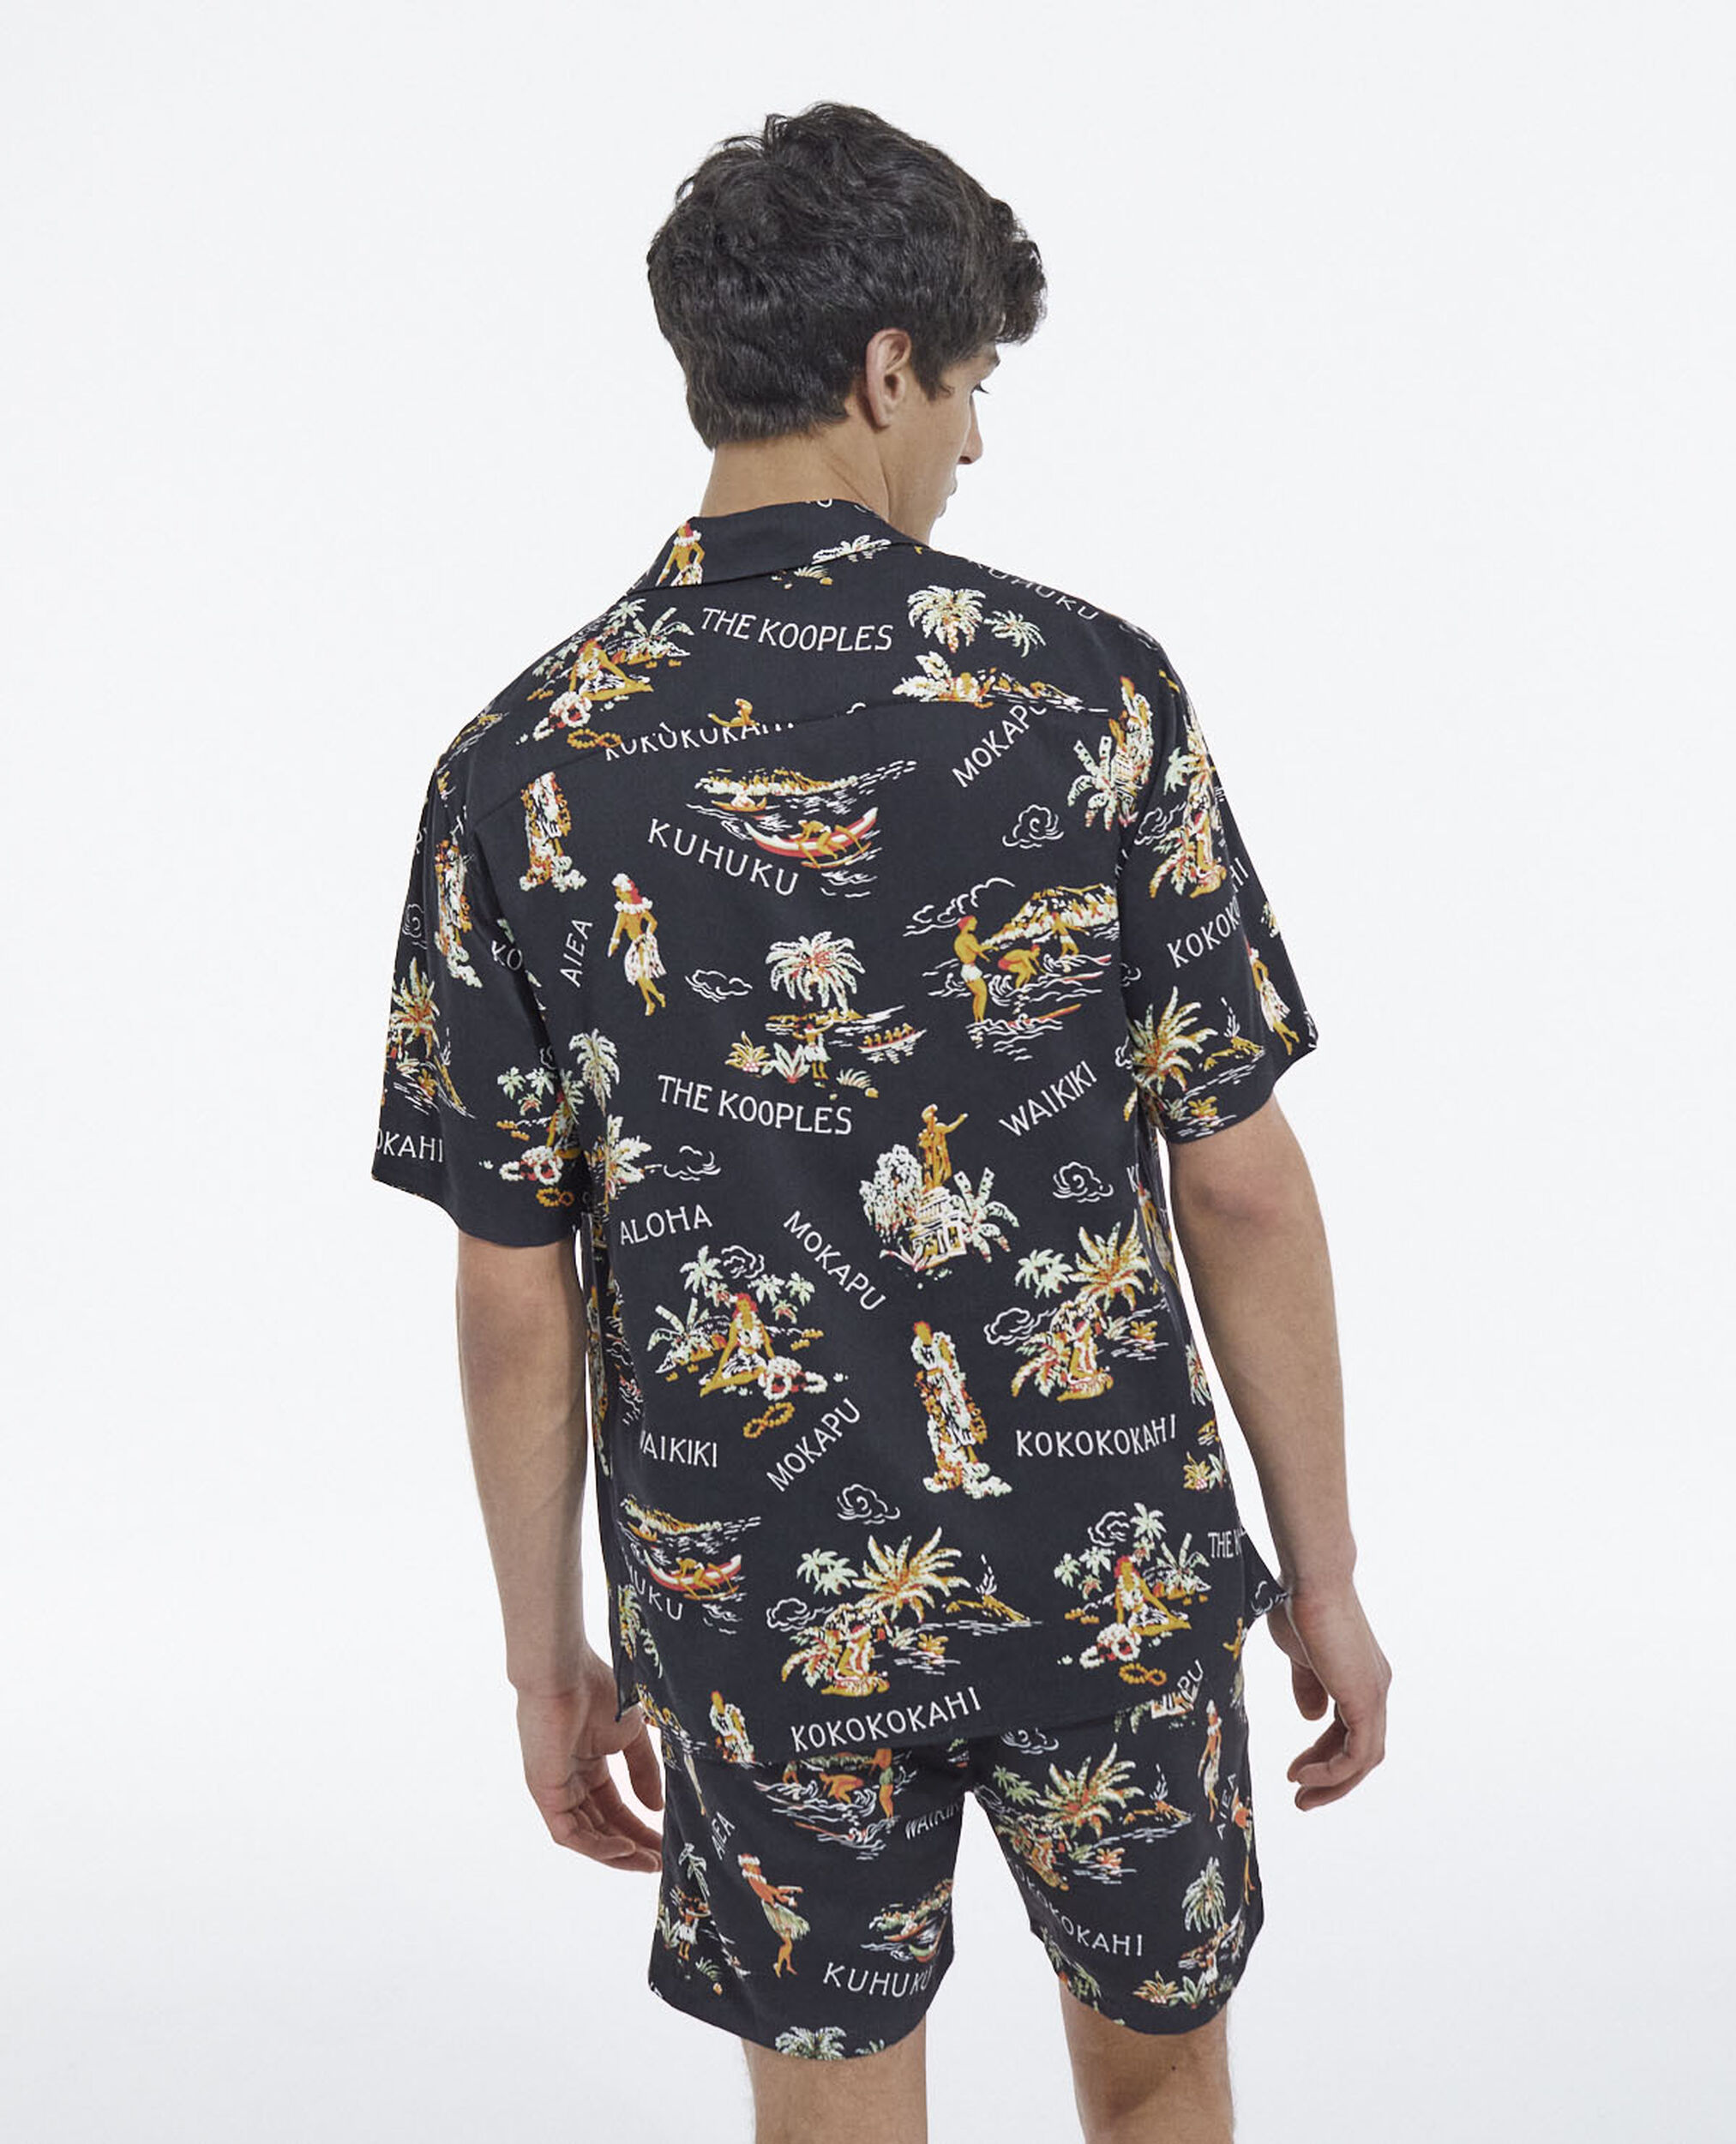 Men’s black shirt with floral print, BLACK / YELLOW, hi-res image number null